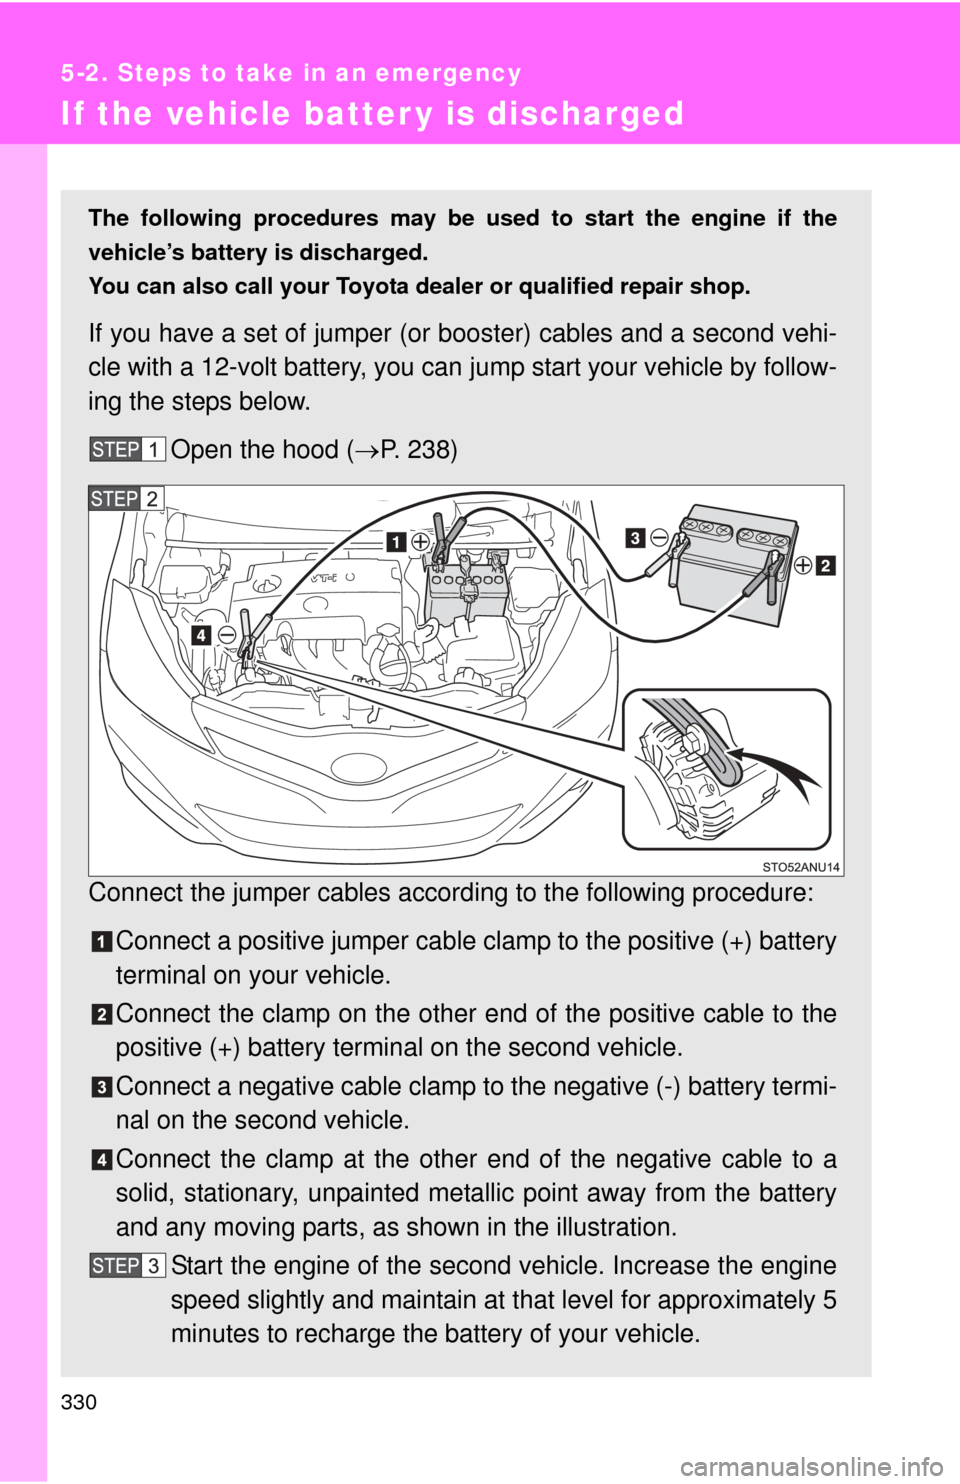 TOYOTA YARIS 2013 3.G Owners Manual 330
5-2. Steps to take in an emergency
If the vehicle batter y is discharged
The following procedures may be used to start the engine if the
vehicle’s battery is discharged.
You can also call your T